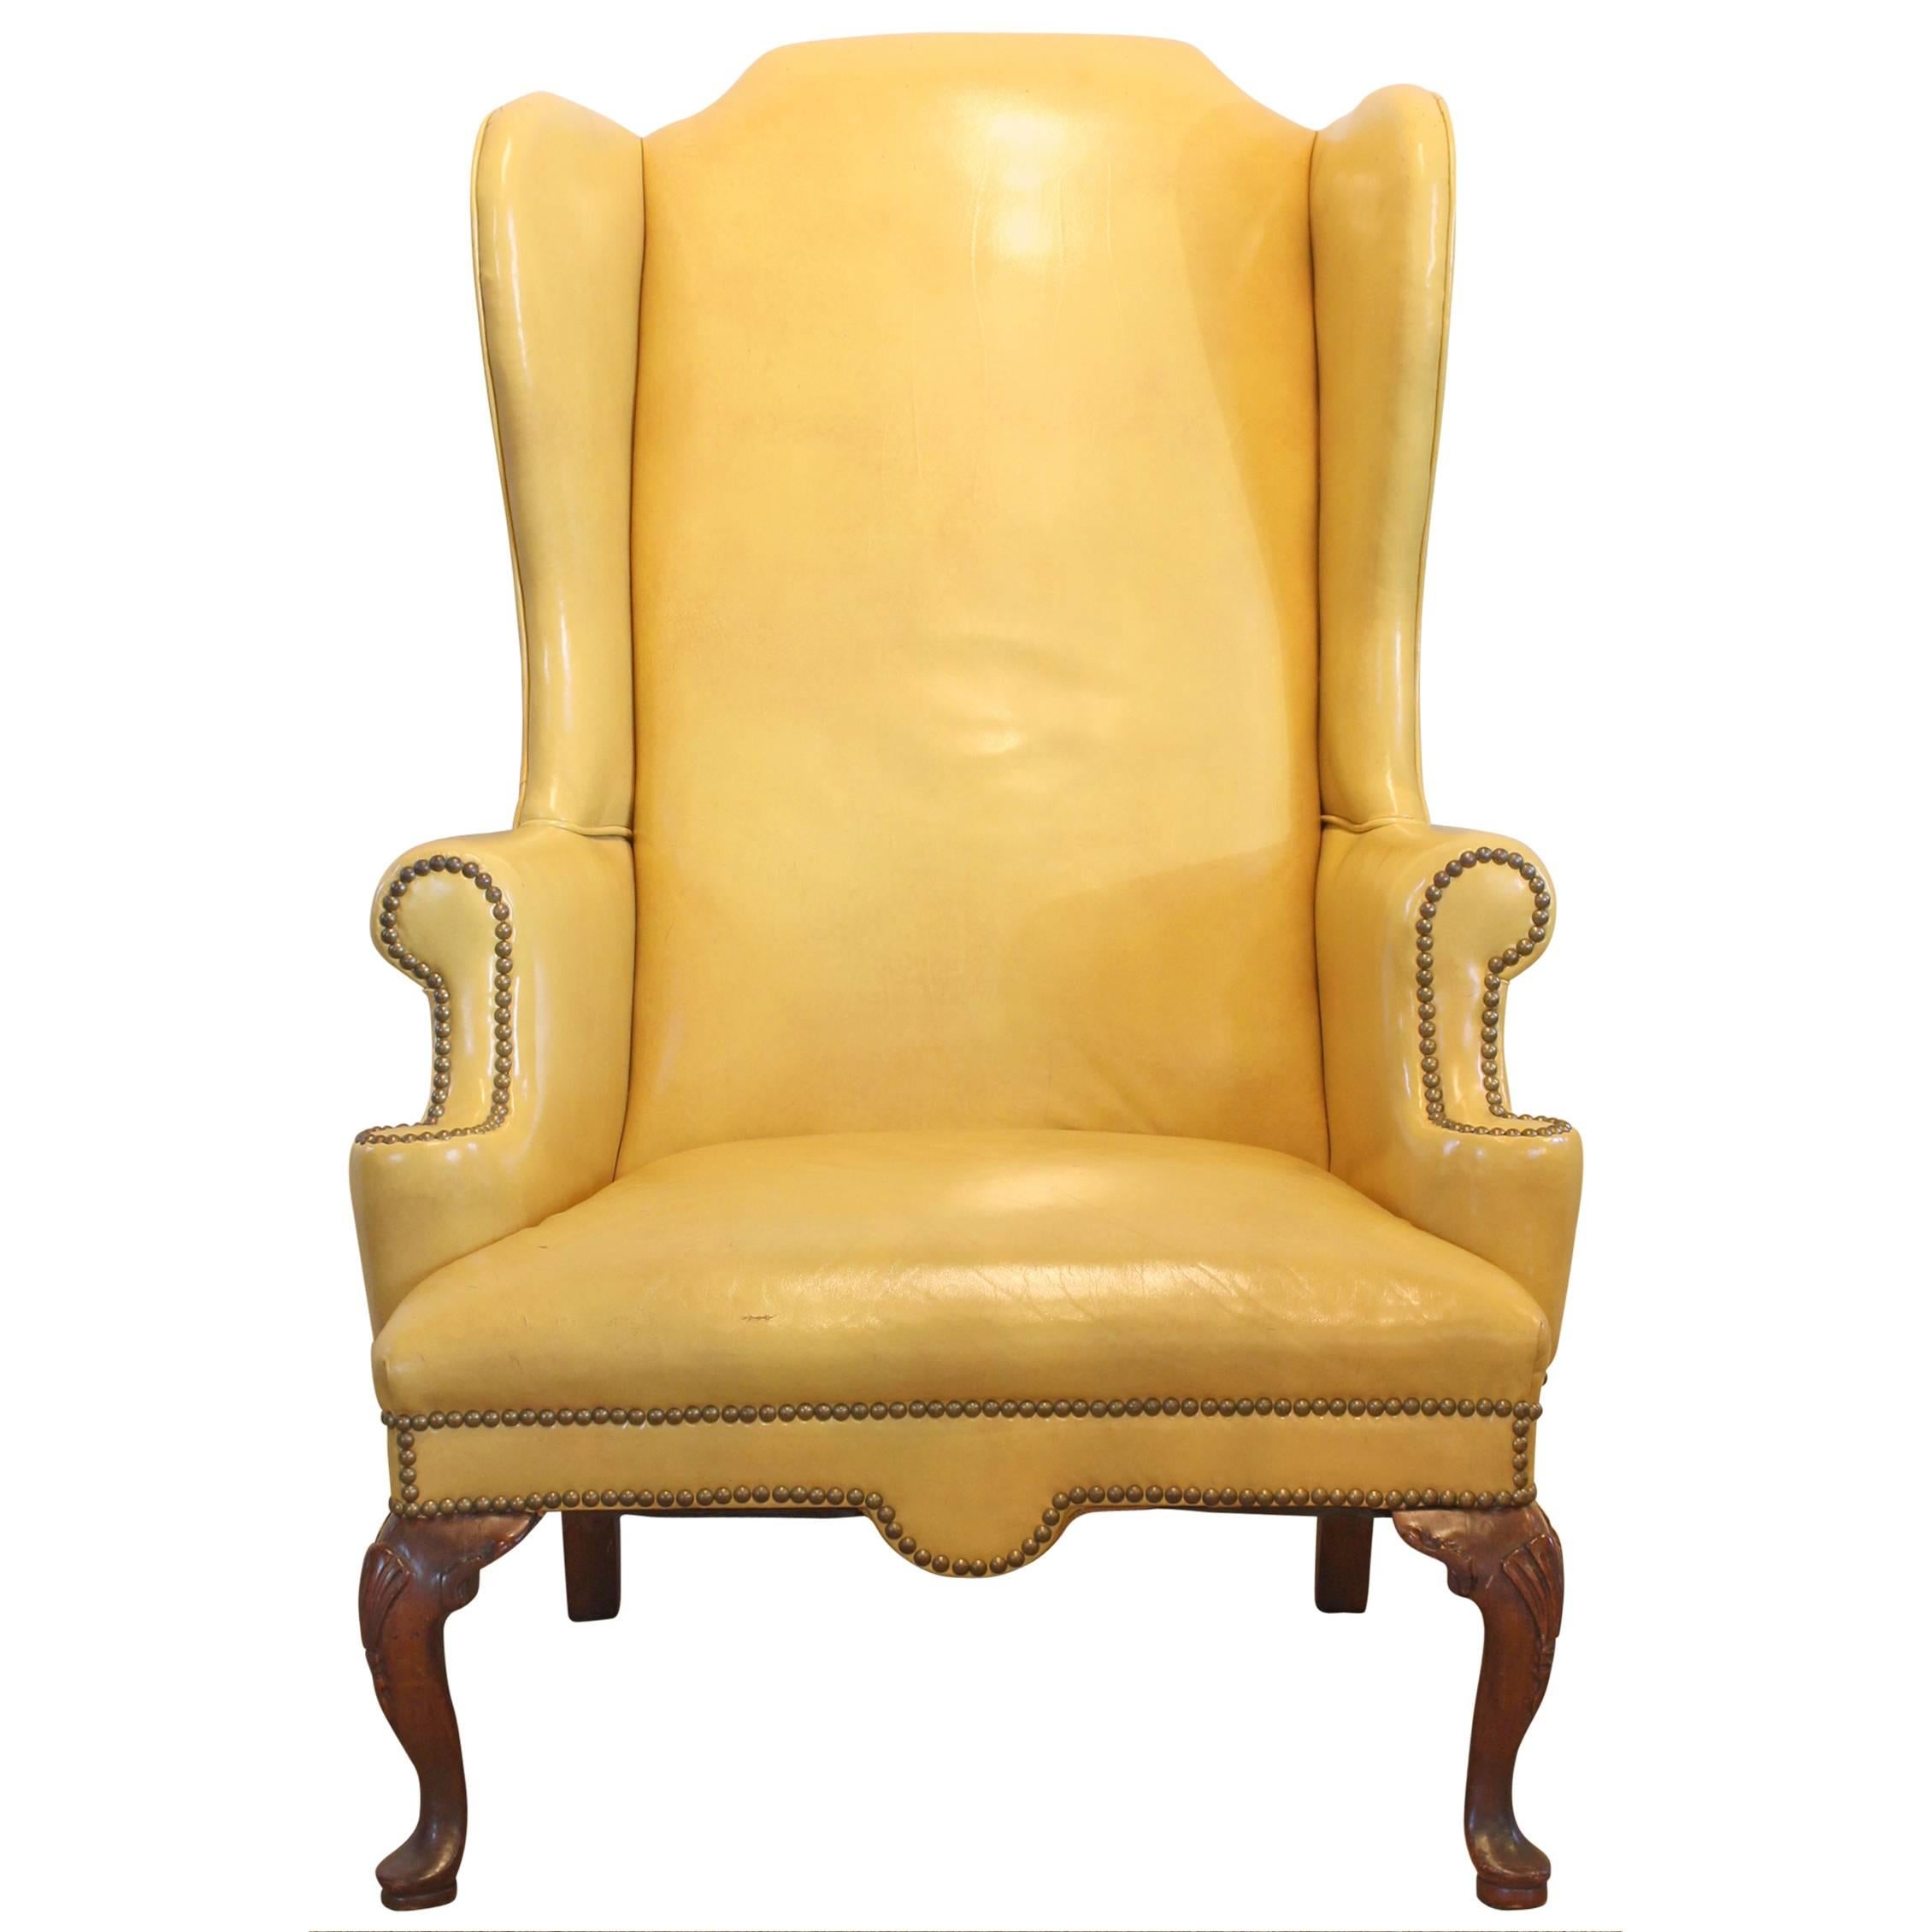 Mustard Yellow Leather Wing Chair